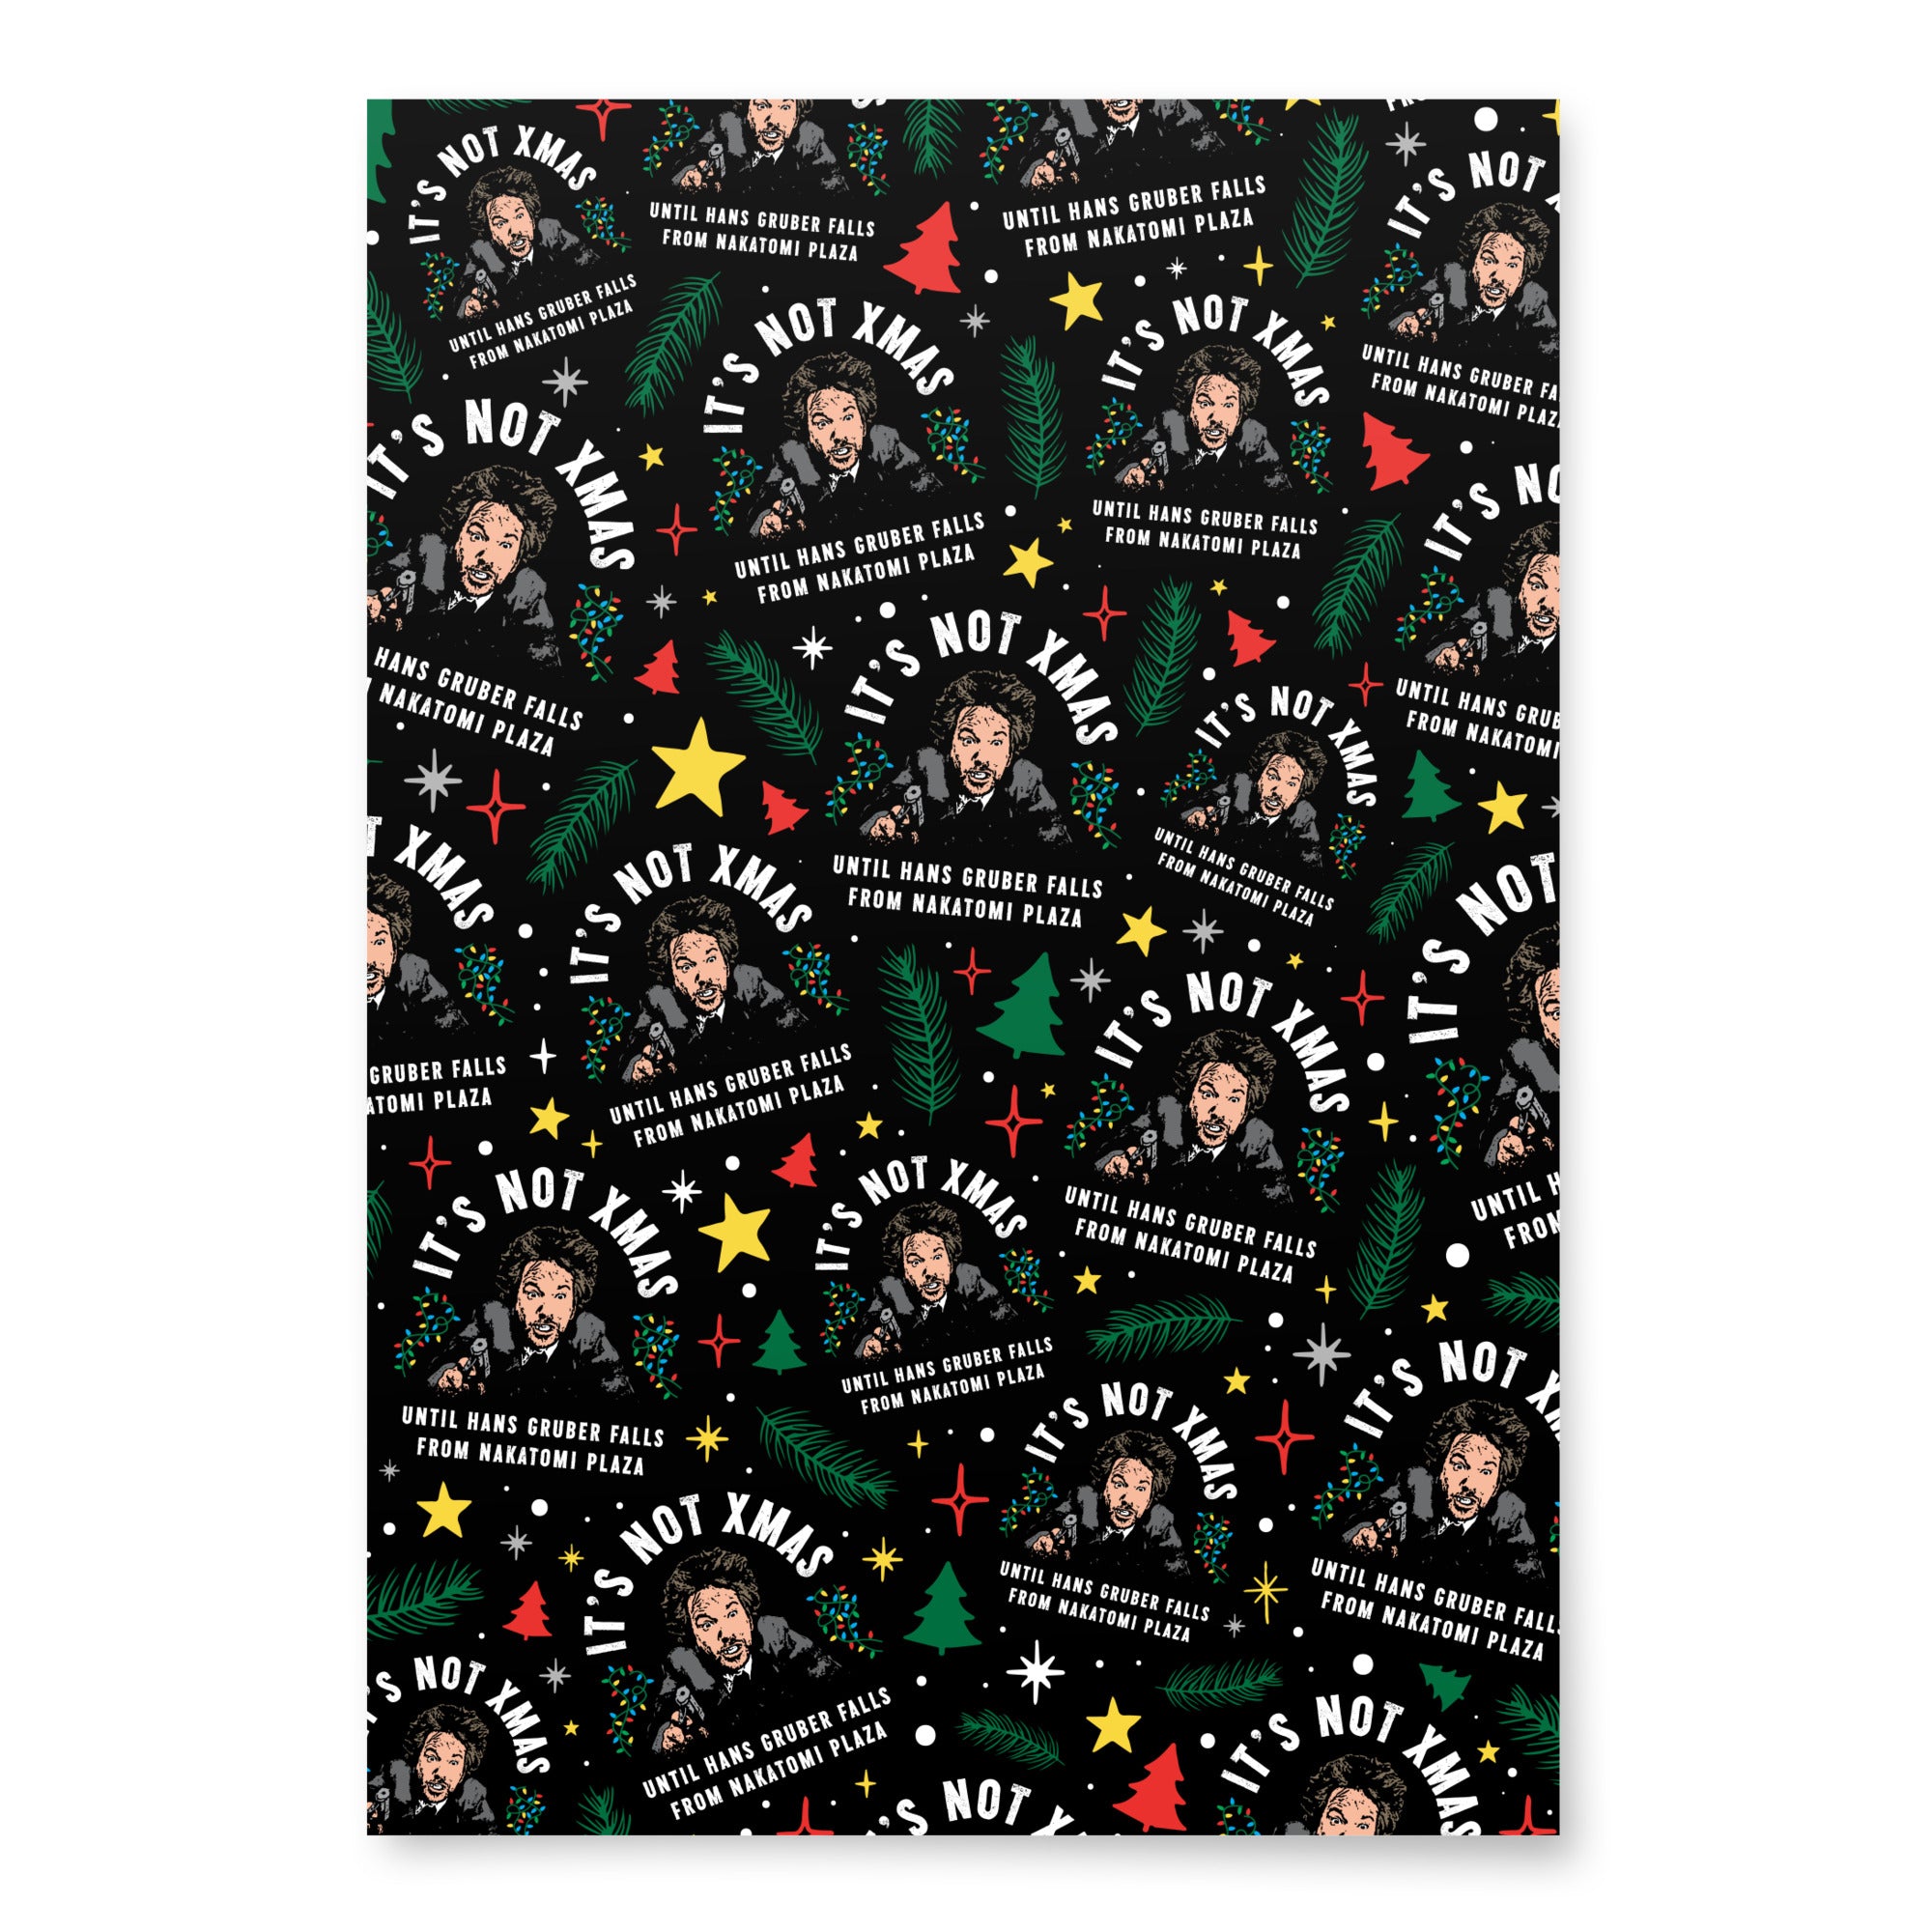 Hans Gruber - Wrapping Paper Sheets (3)